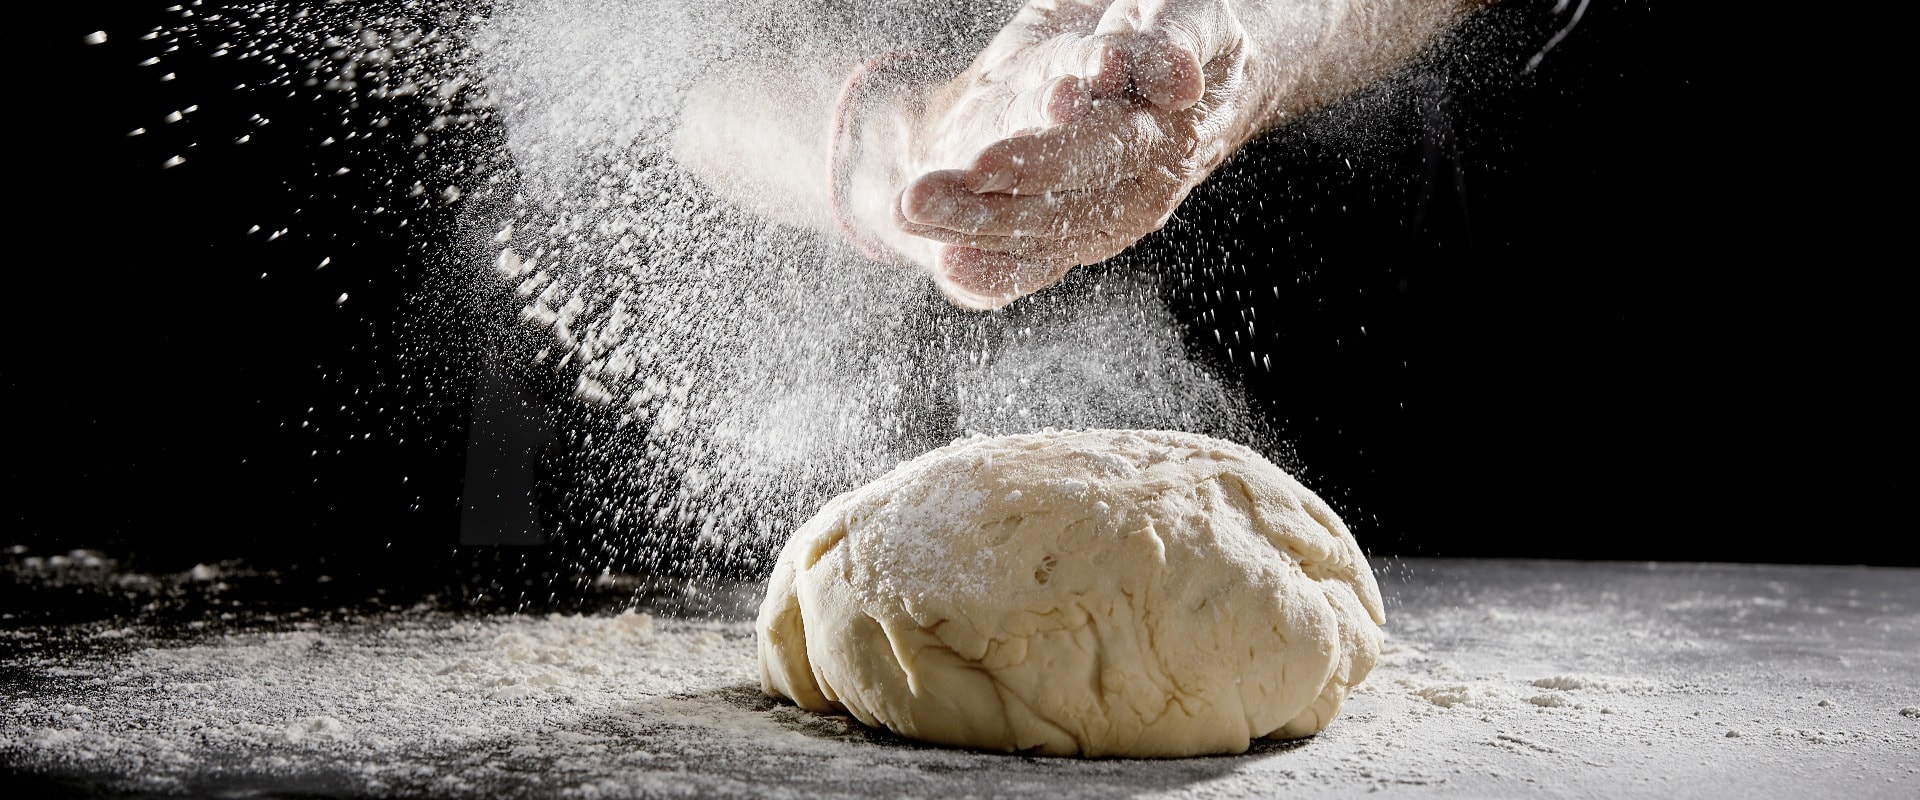 Chef scattering flour while kneading dough